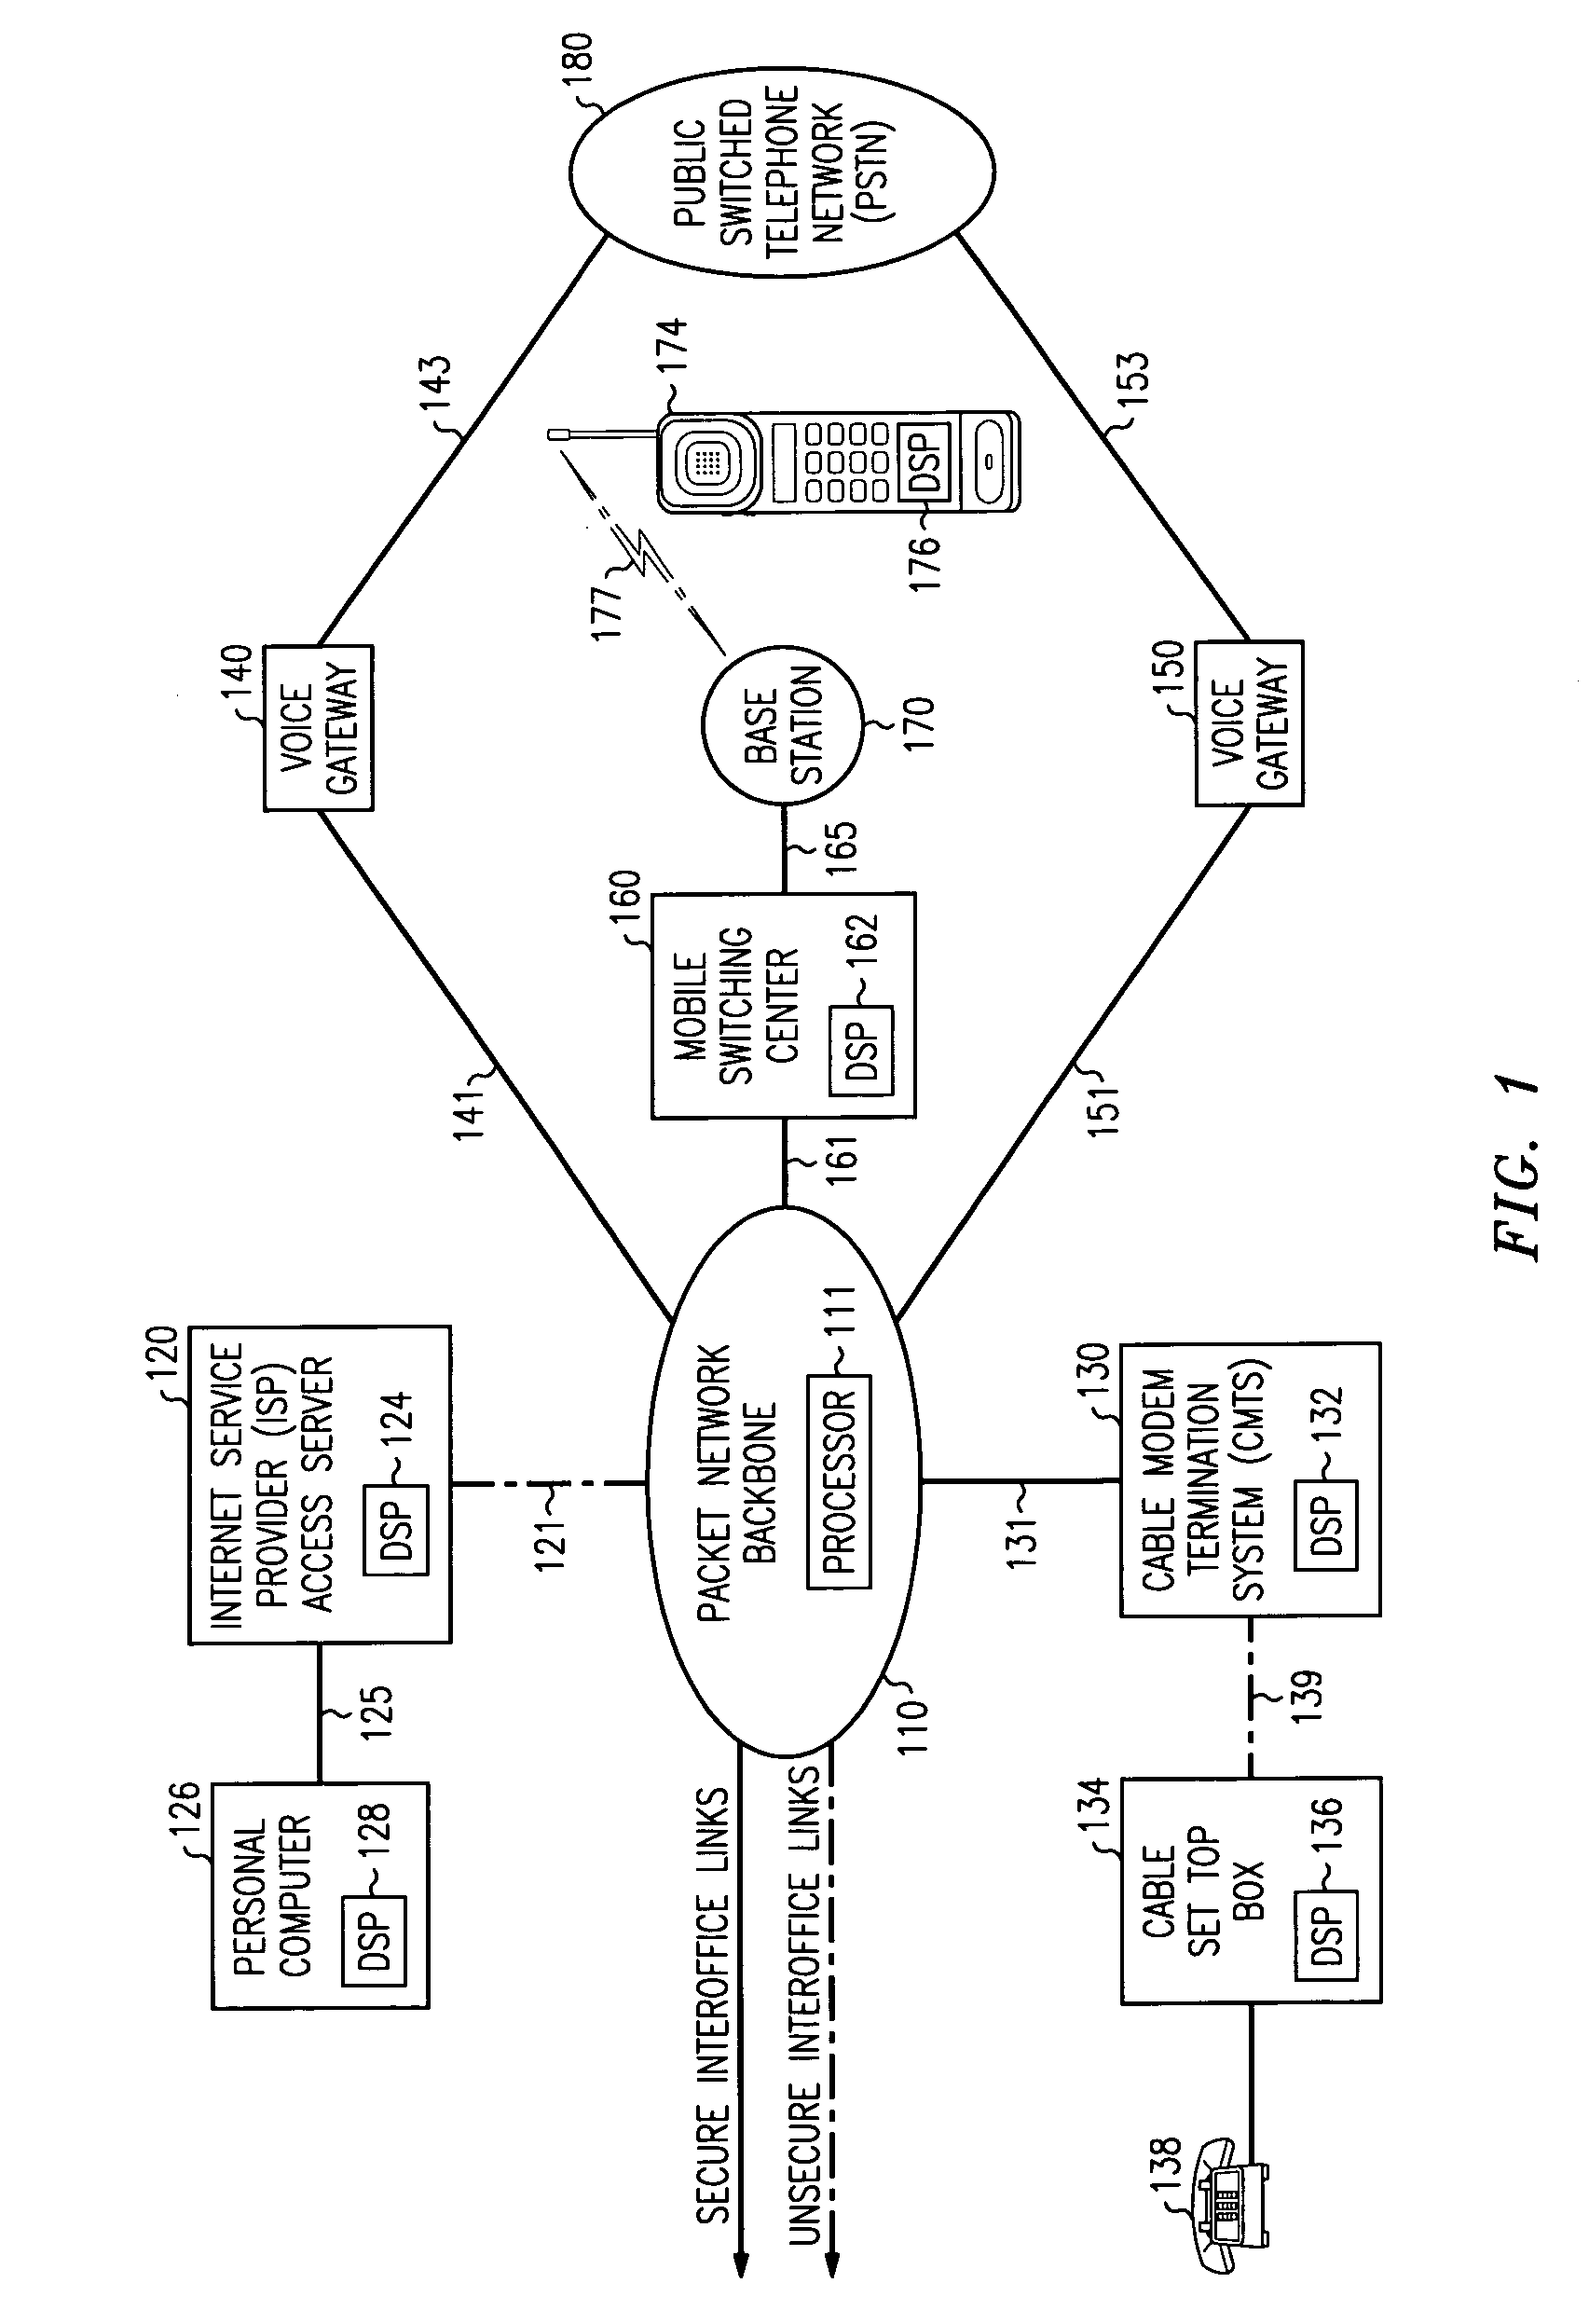 Method for determining the security status of transmissions in a telecommunications network